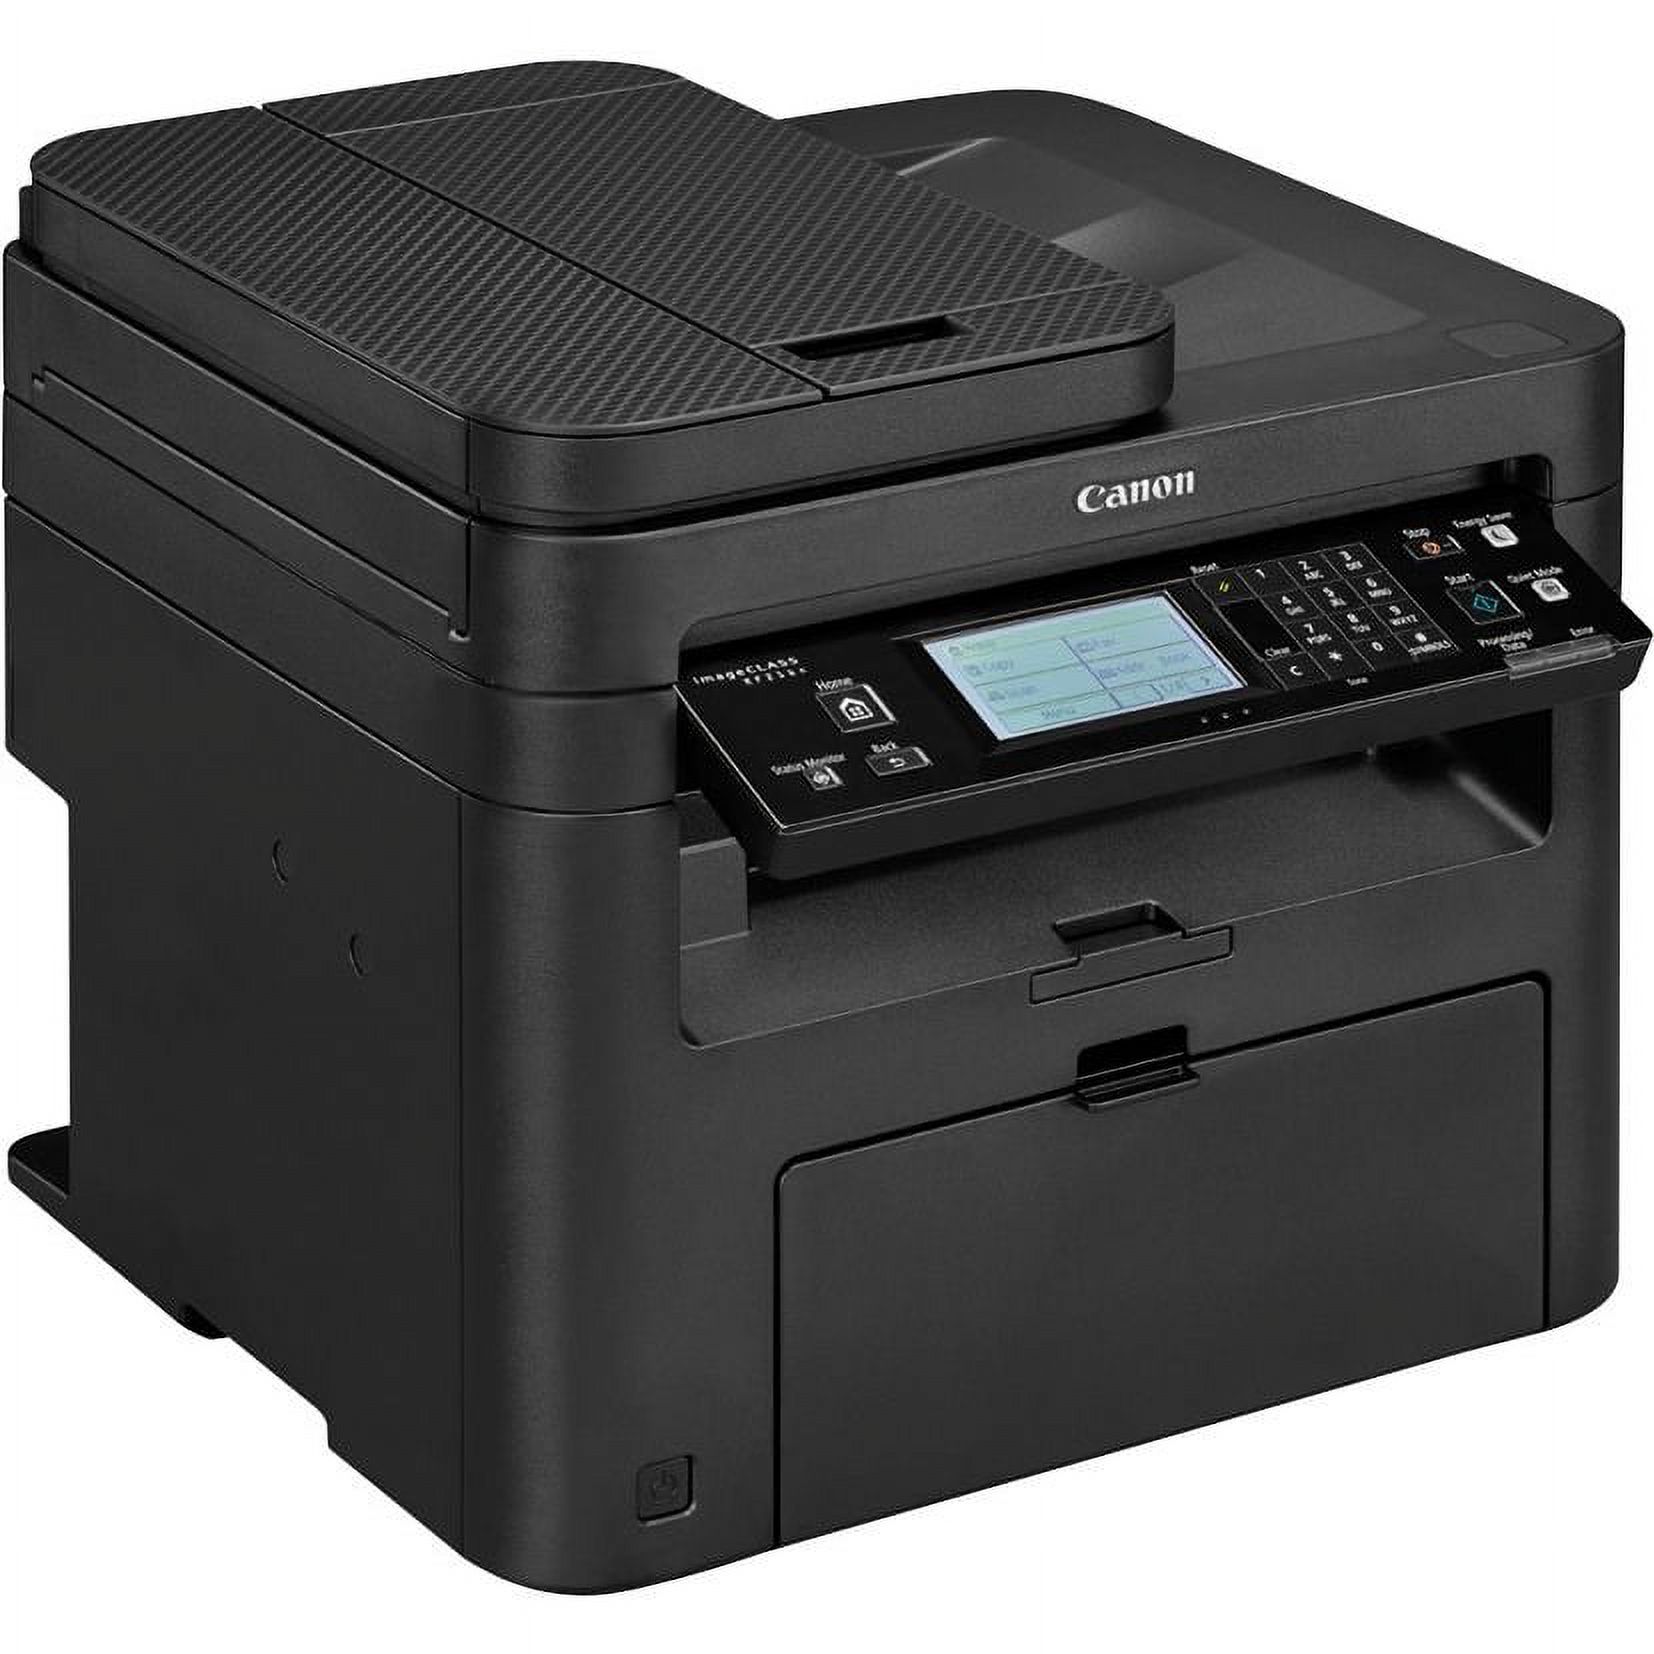 imageCLASS MF216n All-in-One Laser AirPrint Printer Copier Scanner Fax - image 2 of 4